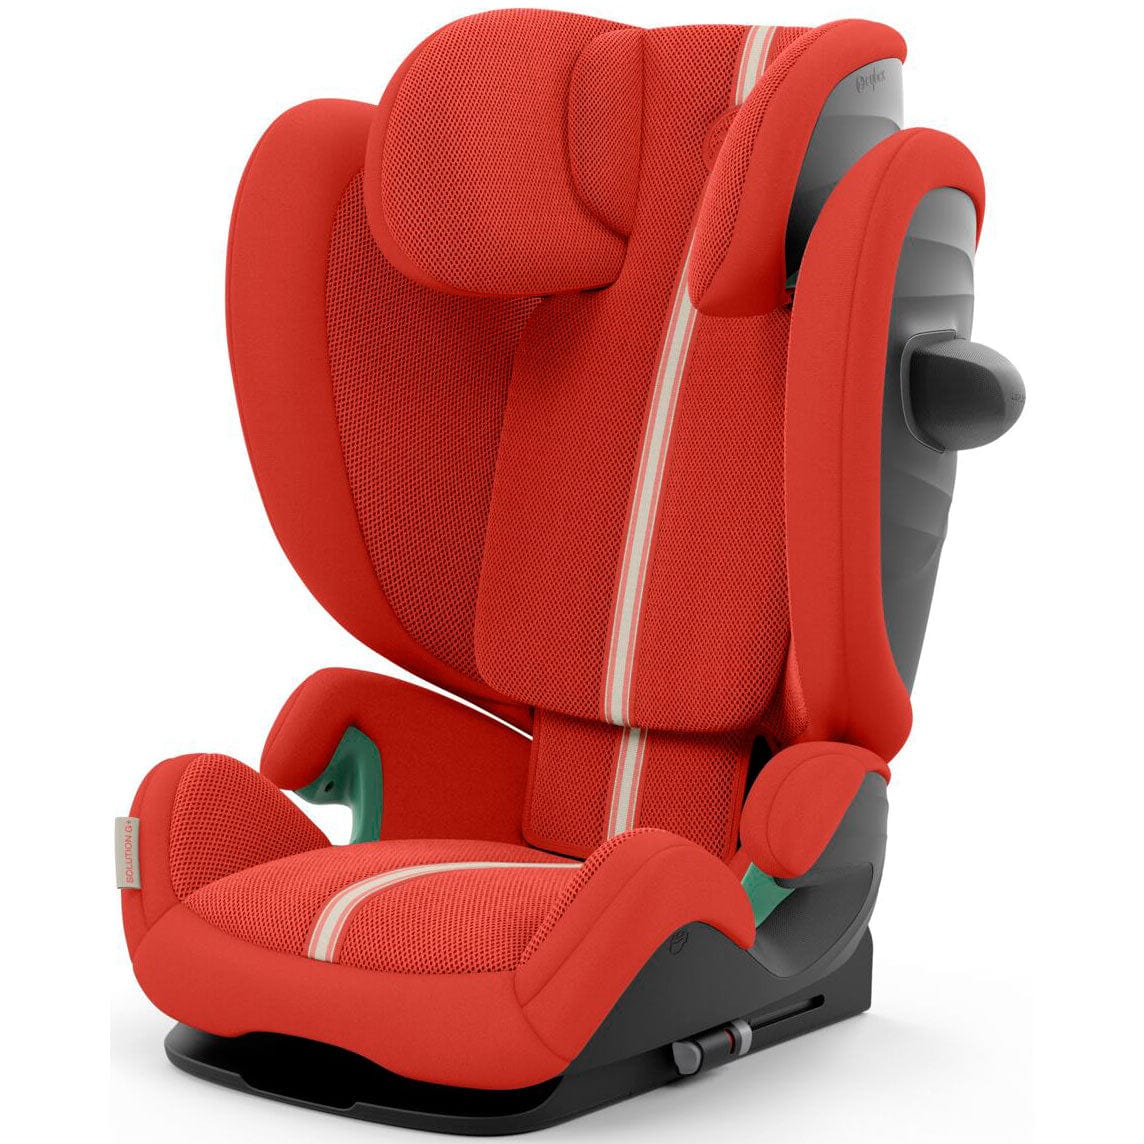 Cybex highback booster seats Cybex Solution G i-Fix Plus Highback Booster in Hibiscus Red 523001107